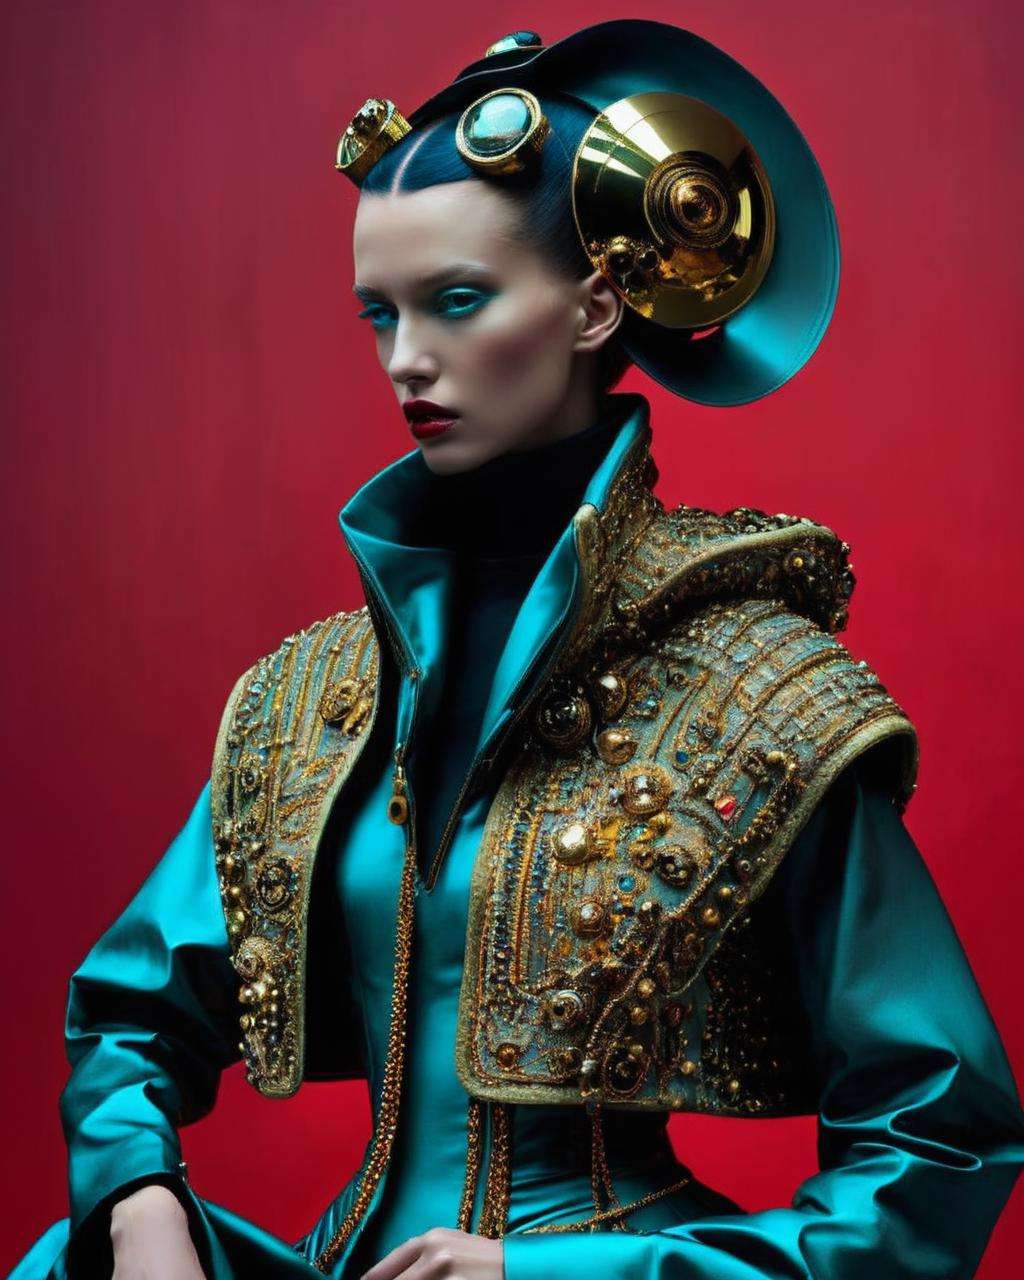 weird fashion, fashion photography , inspired by classical paintings and cyberpunk<lora:weird_fashion:1.0>